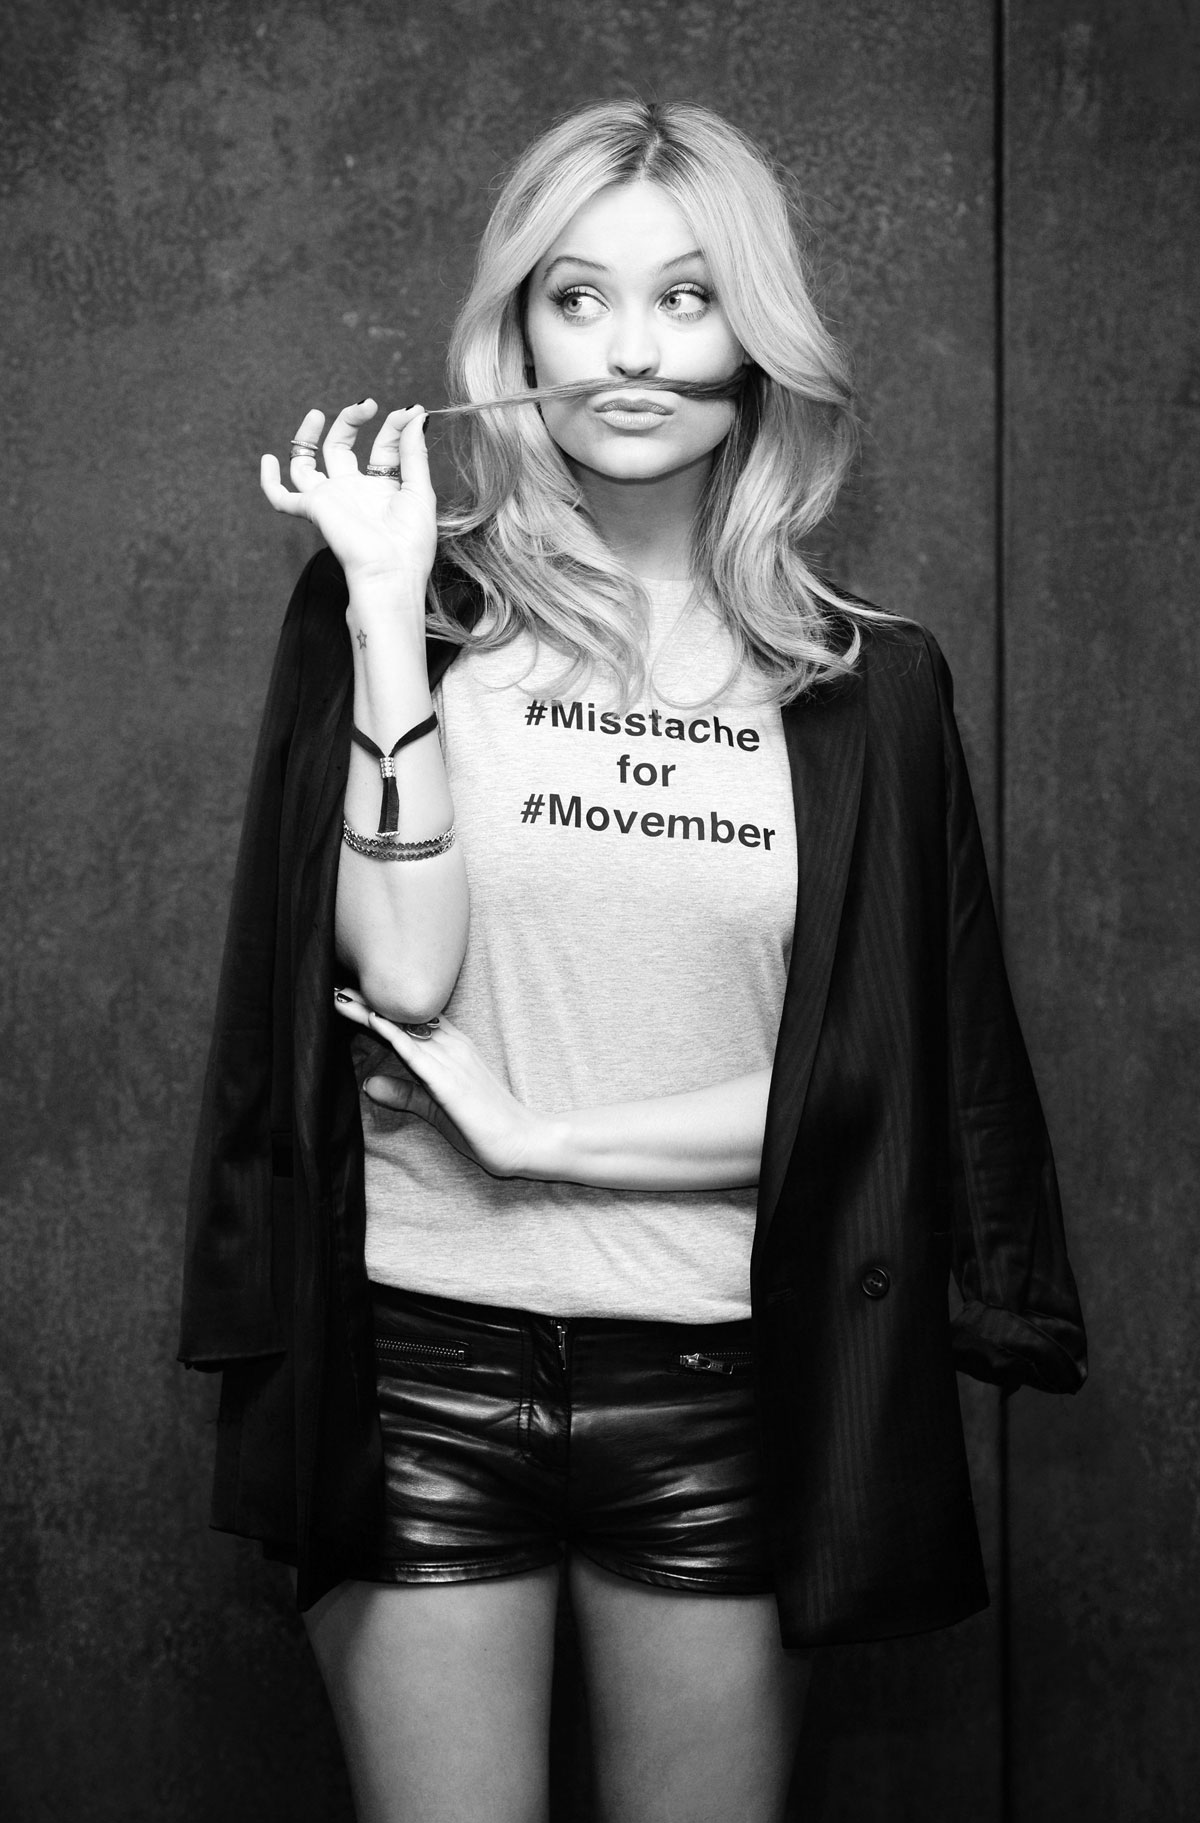 Laura Whitmore poses for Aussie’s ‘Misstache for Movember’ Campaign